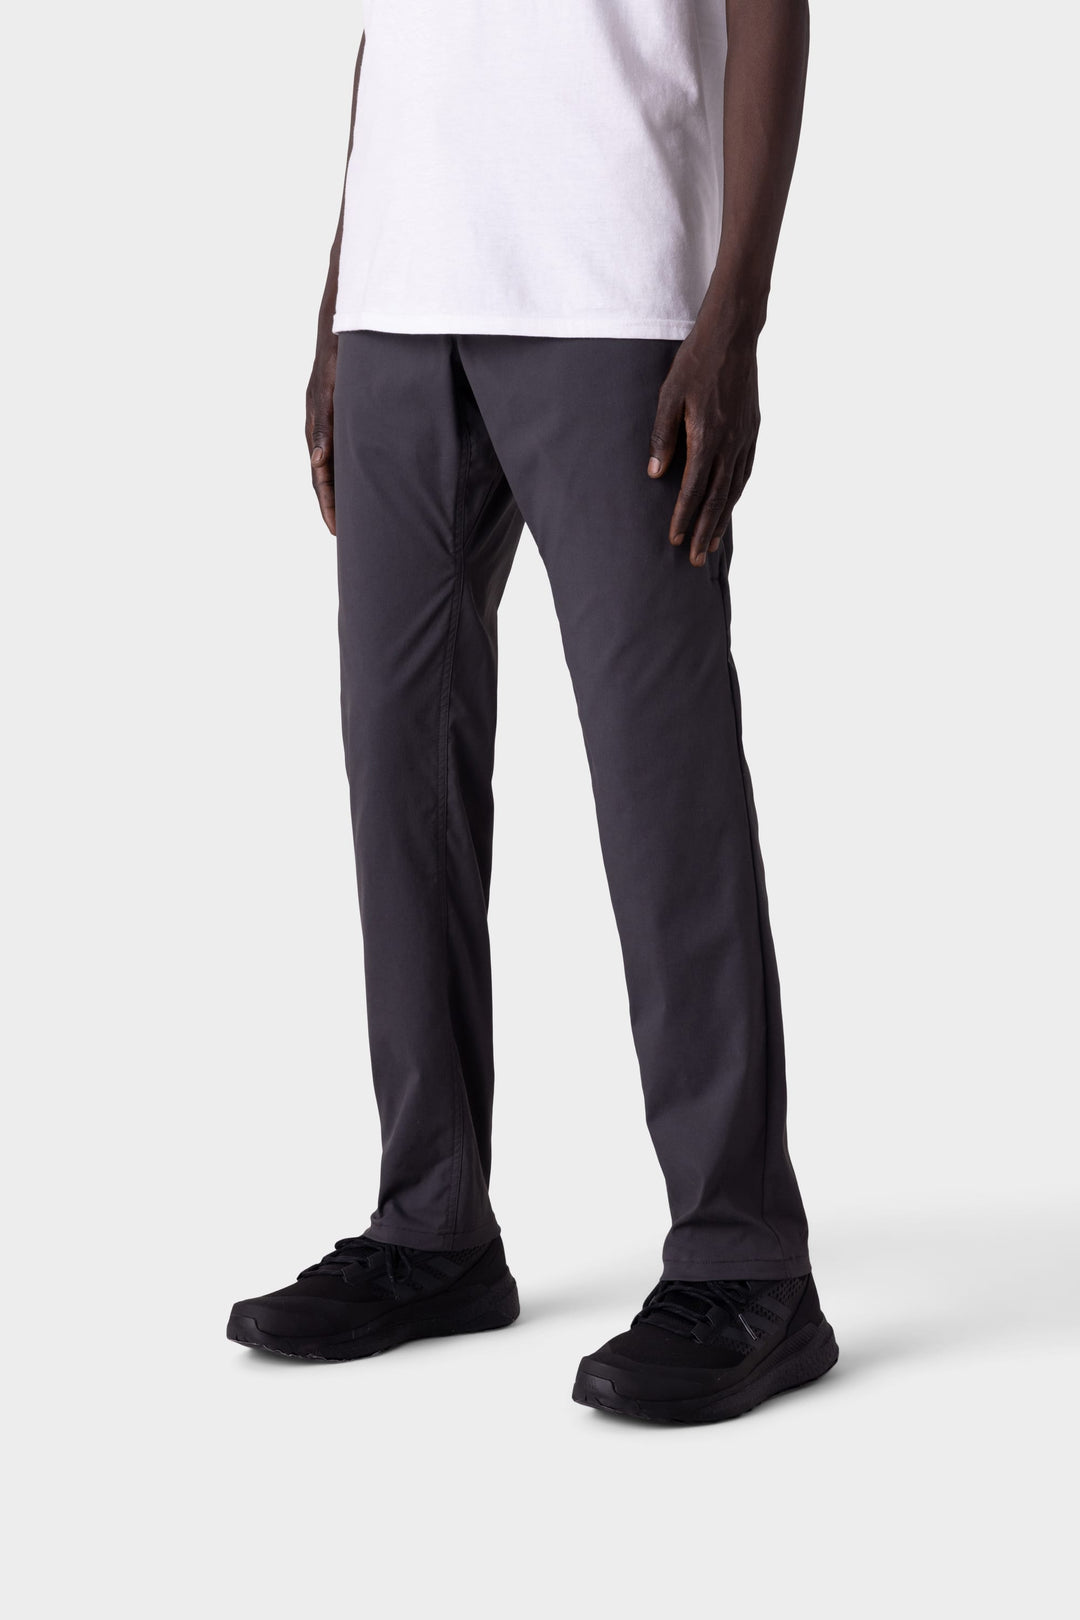 686 Everywhere Pant Slim Fit 32" - Charcoal - Sun Diego Boardshop